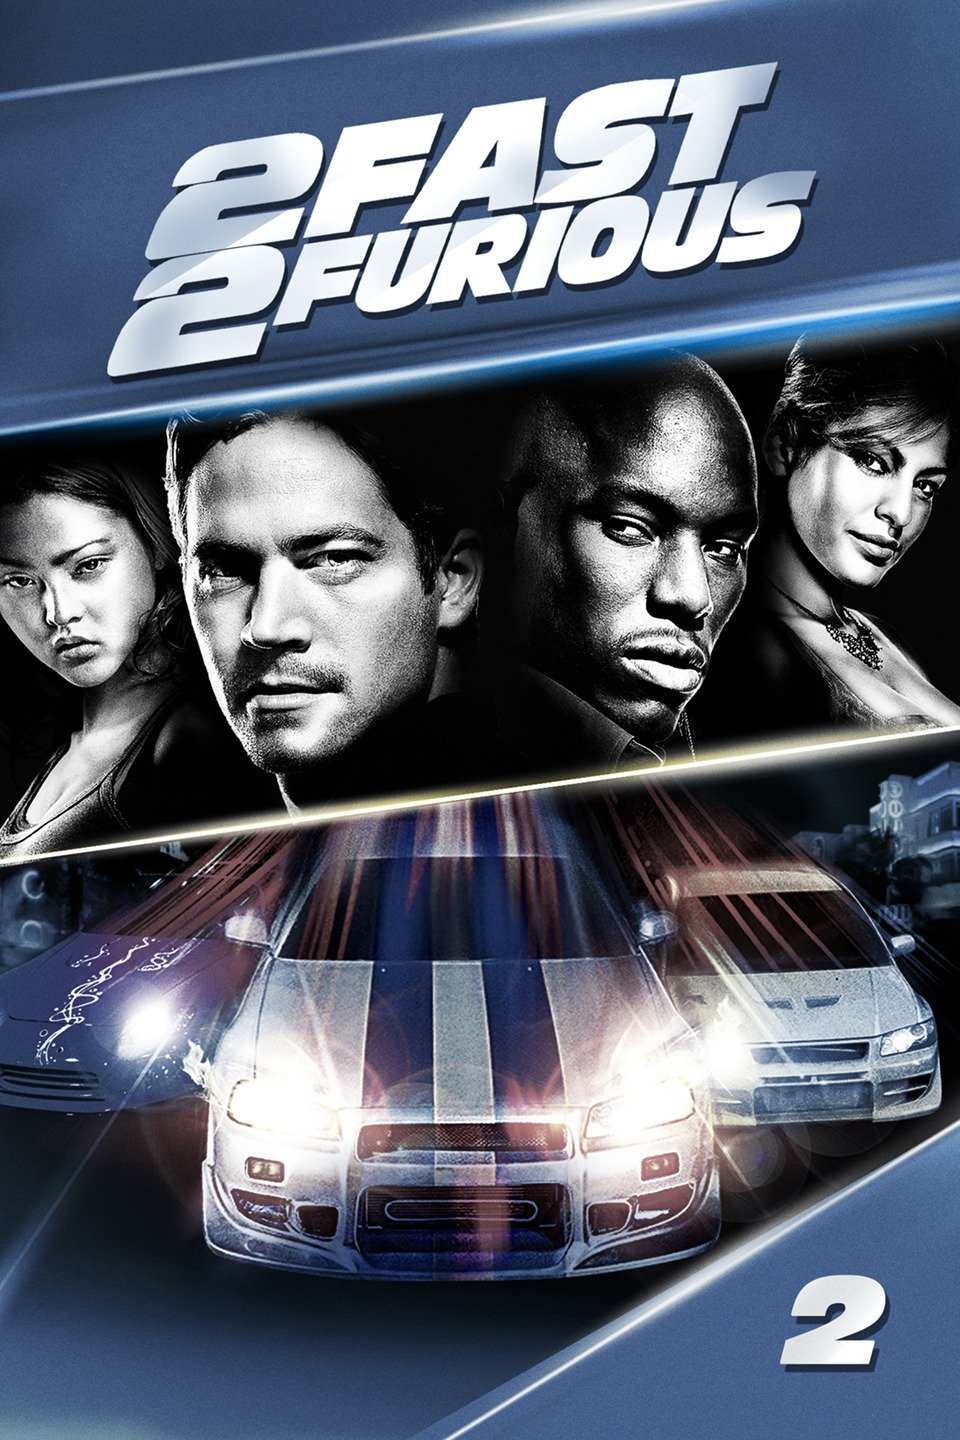 wwatch fast and furious 4 online free